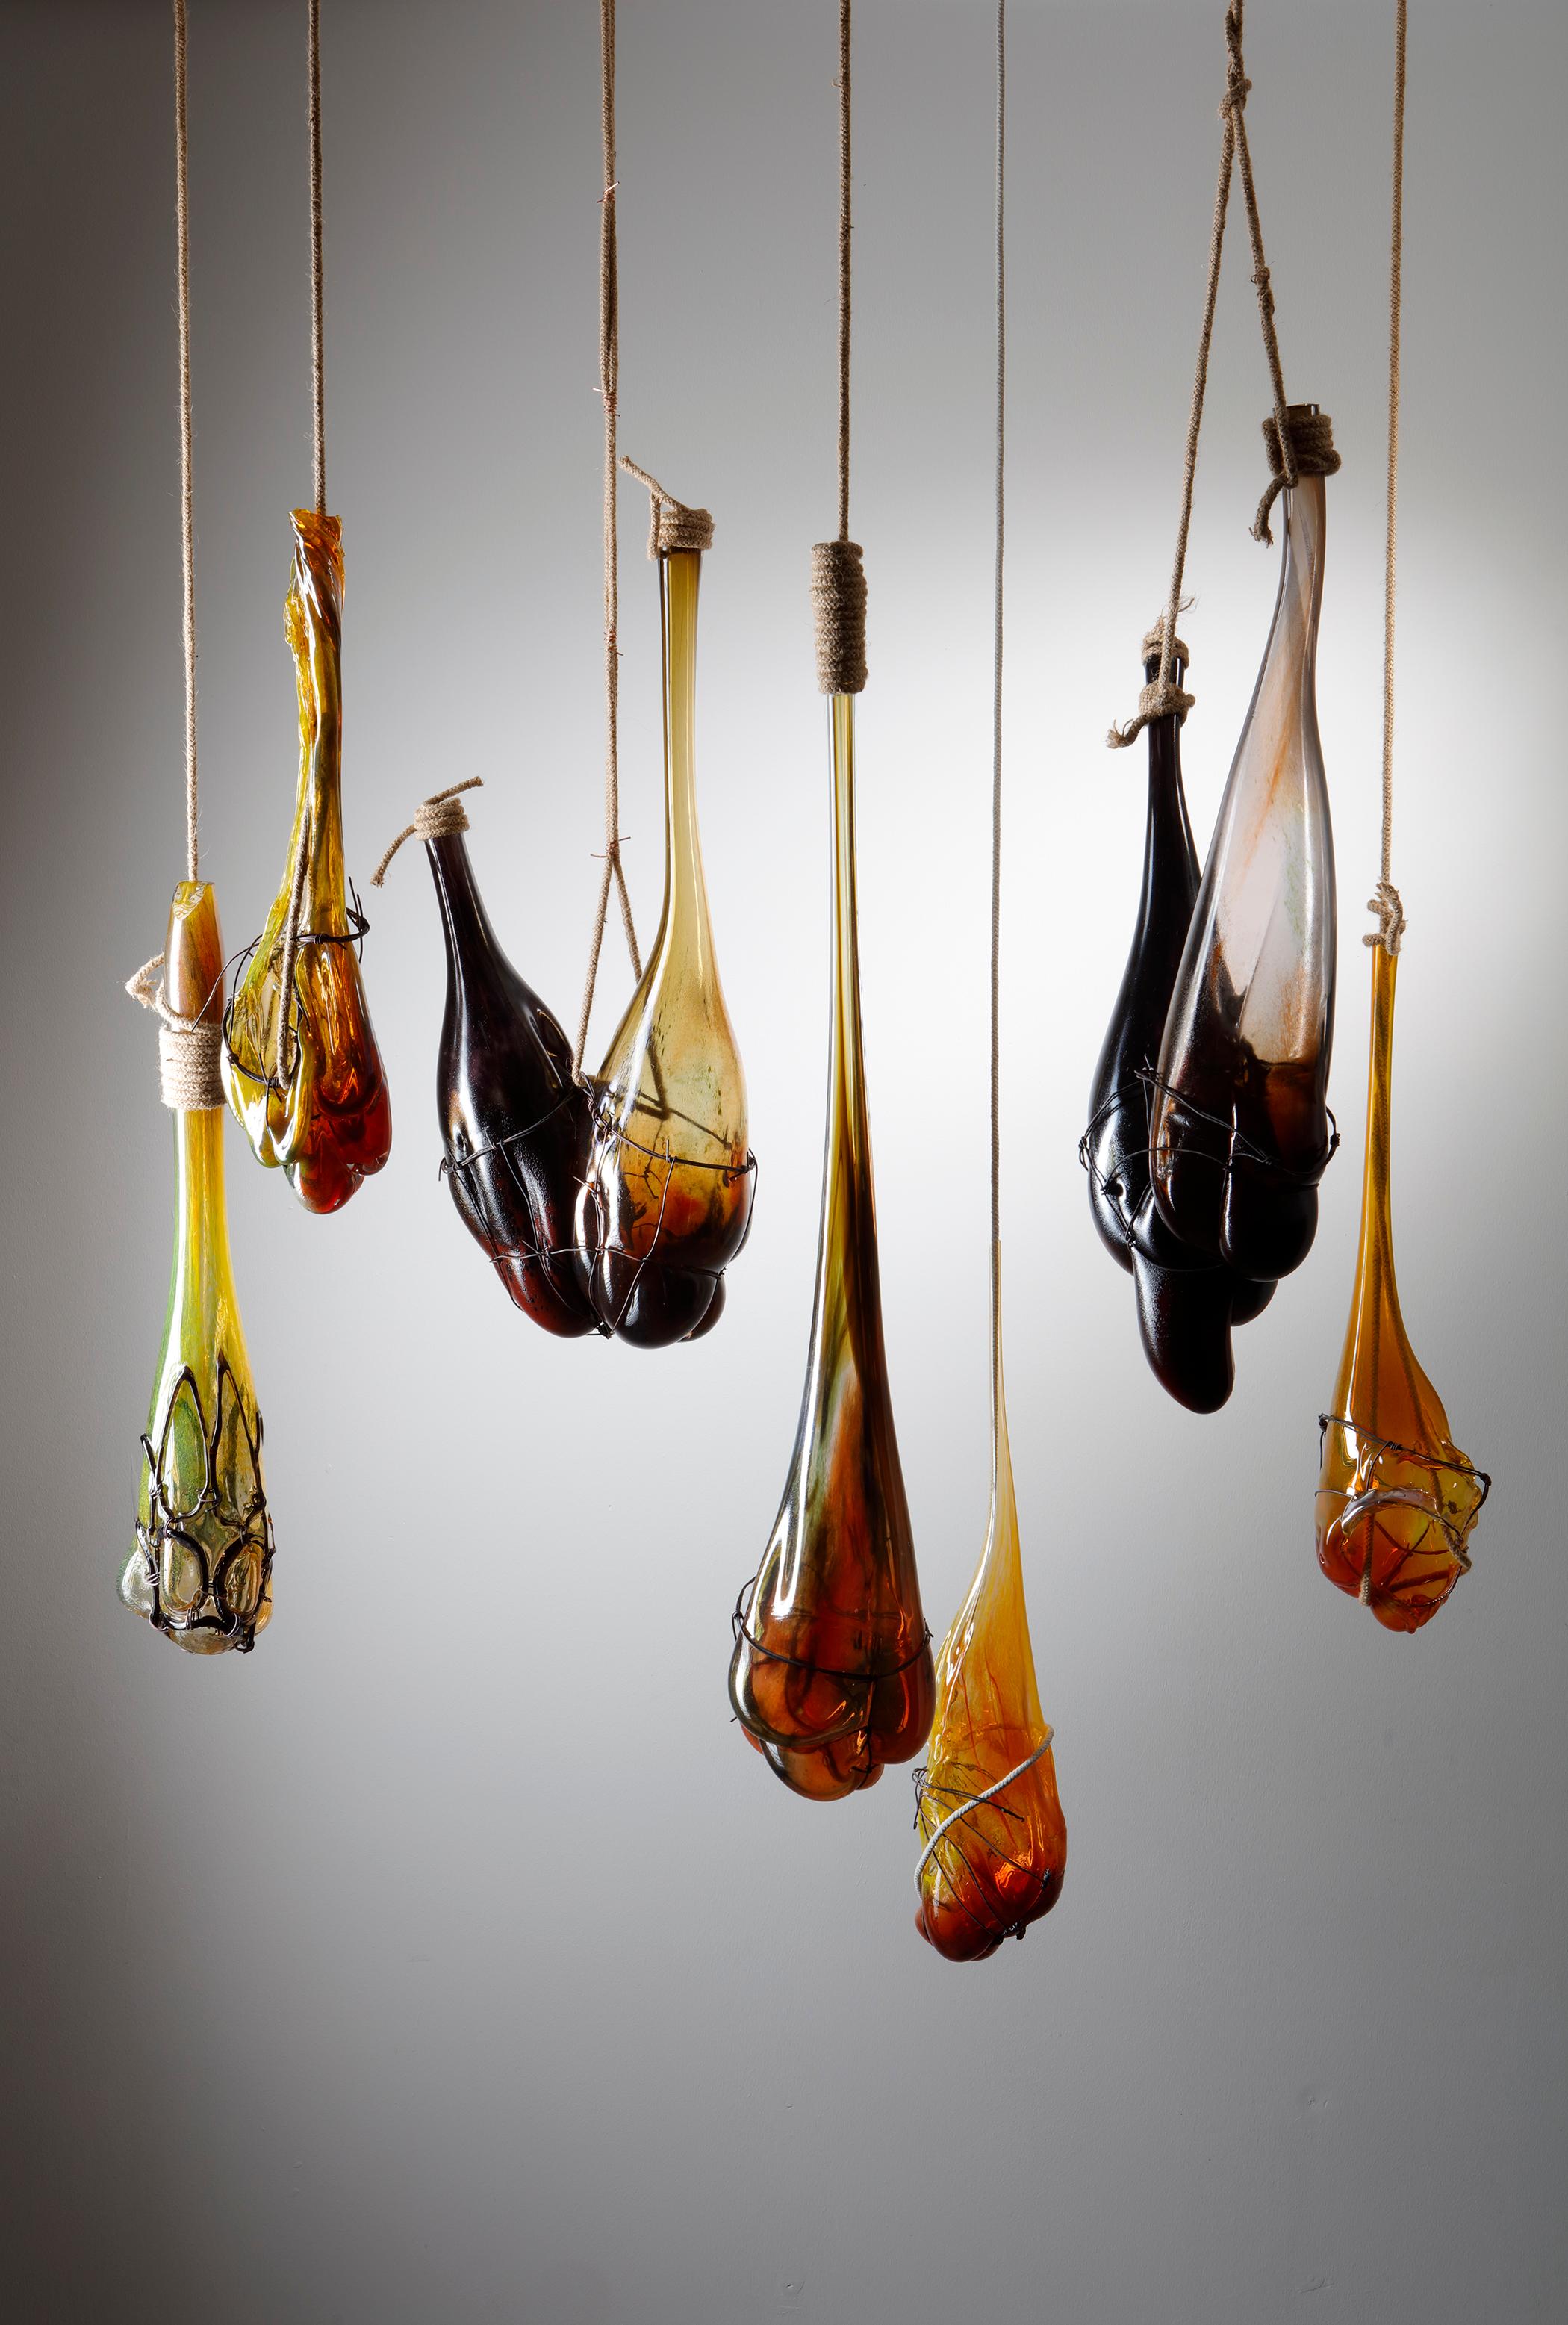 British Strange Fruit Installation, a Unique Glass Hanging Sculpture by Chris Day For Sale